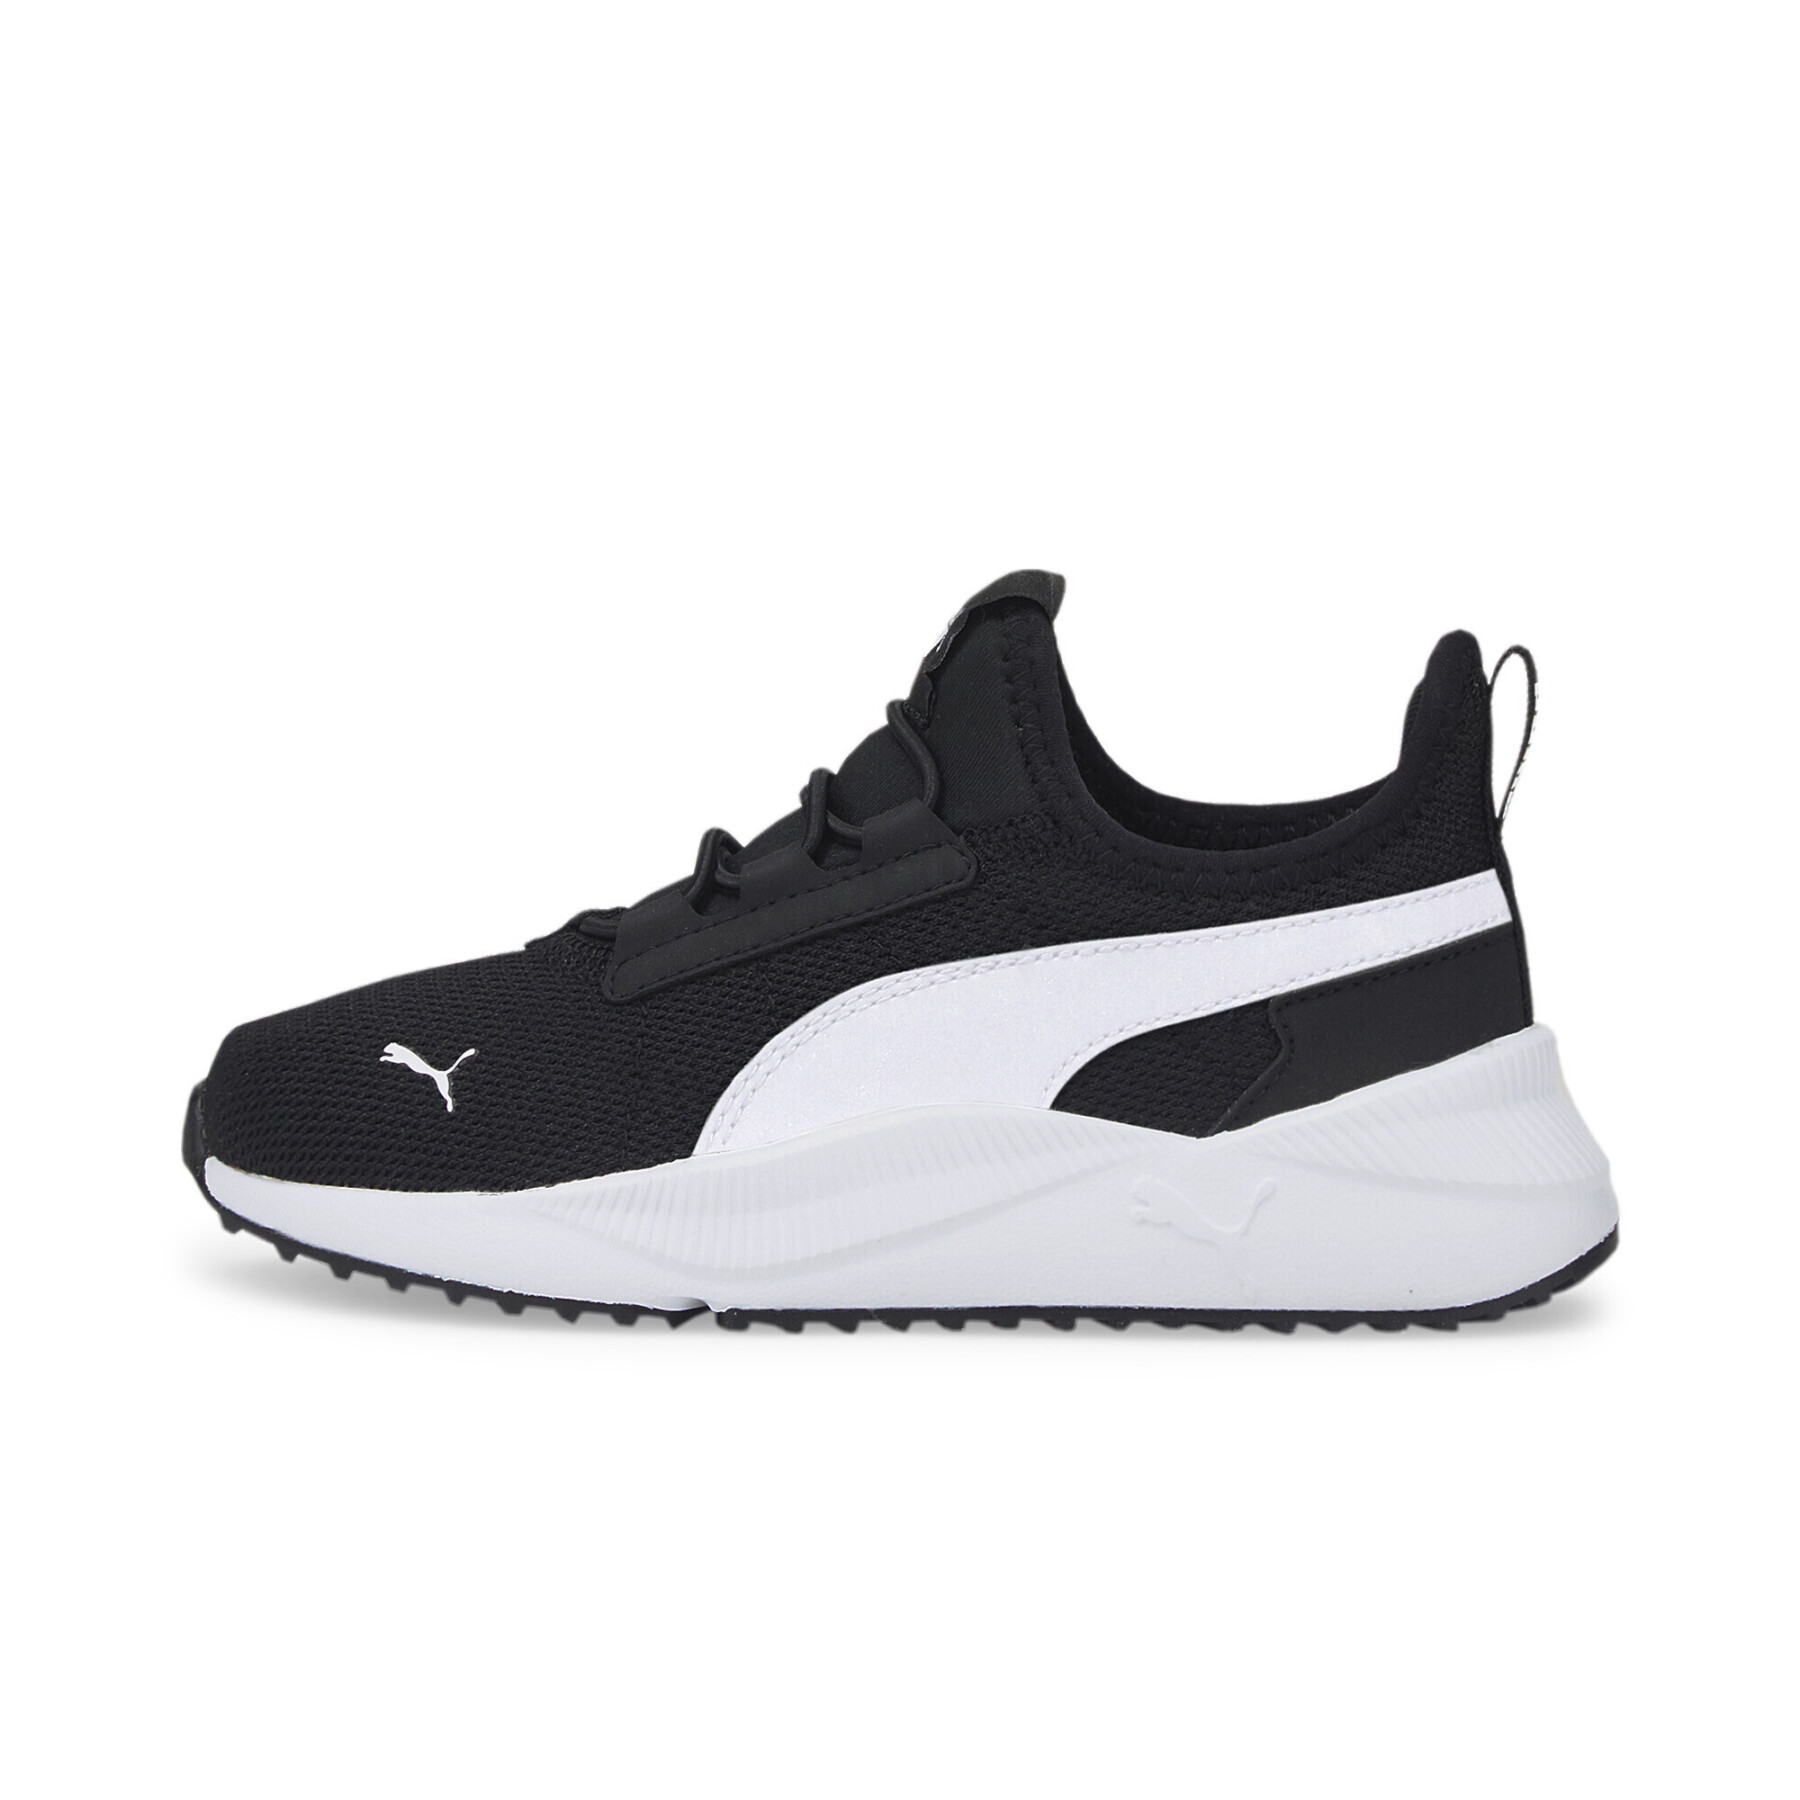 Children's sneakers Puma Pacer Easy Street AC